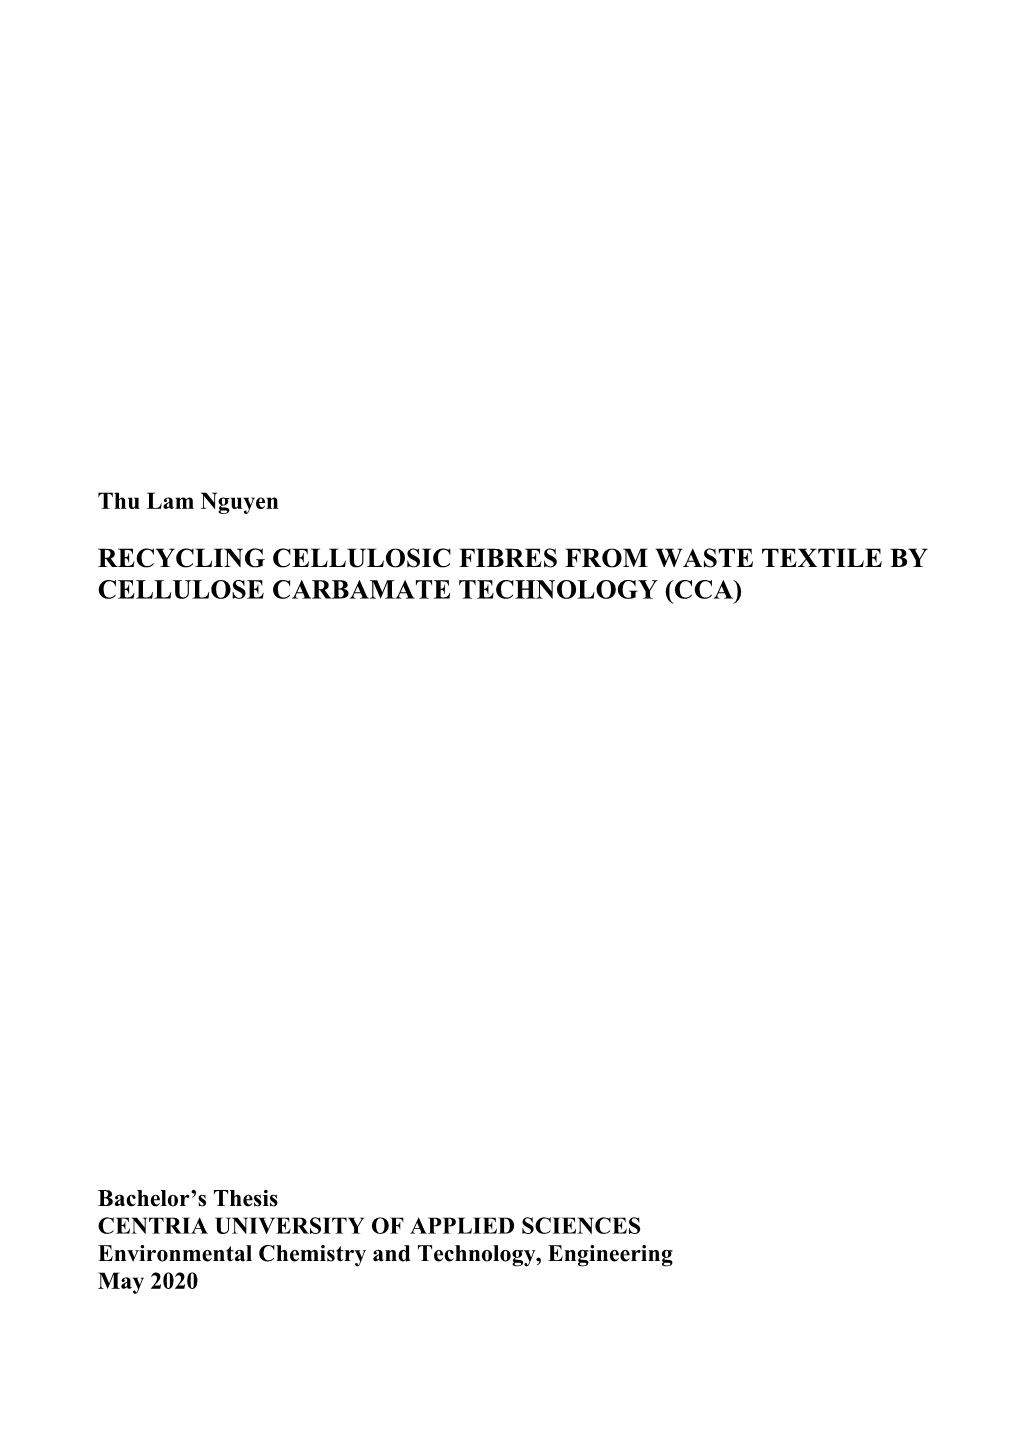 Recycling Cellulosic Fibres from Waste Textile by Cellulose Carbamate Technology (Cca)